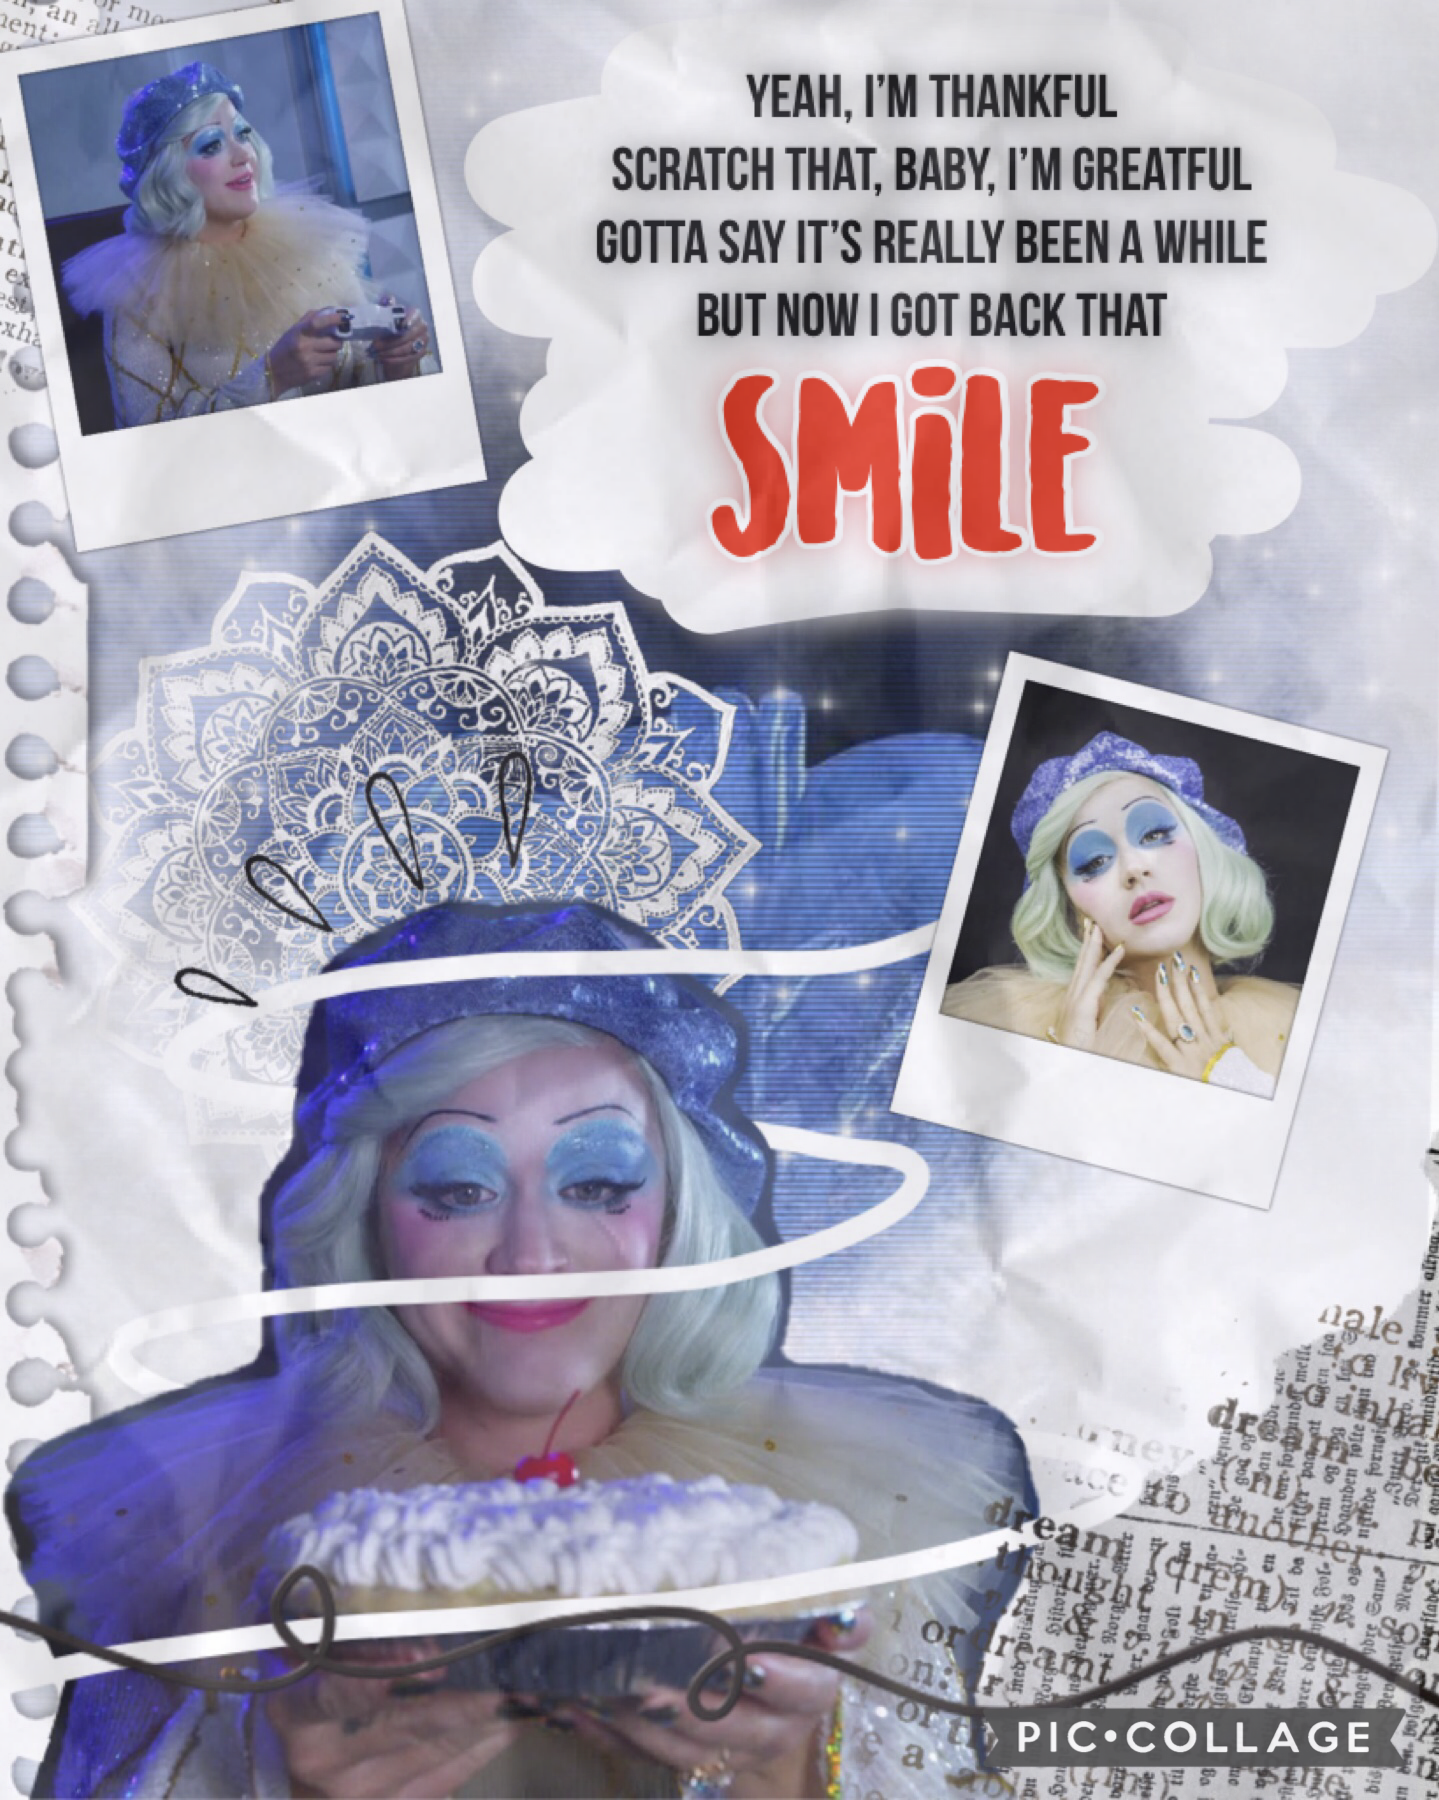 💙 TAP ❤️
💙 Katy Perry Collage! ❤️
💙 Lyrics from Katys song ‘Smile’ ❤️
💙 this song is about depression and was a vent :) ❤️
💙 Ilysm ❤️
💙 QOTD- how to u sleep at night? ❤️
💙 AOTD- idk im sleeping 😬 ❤️